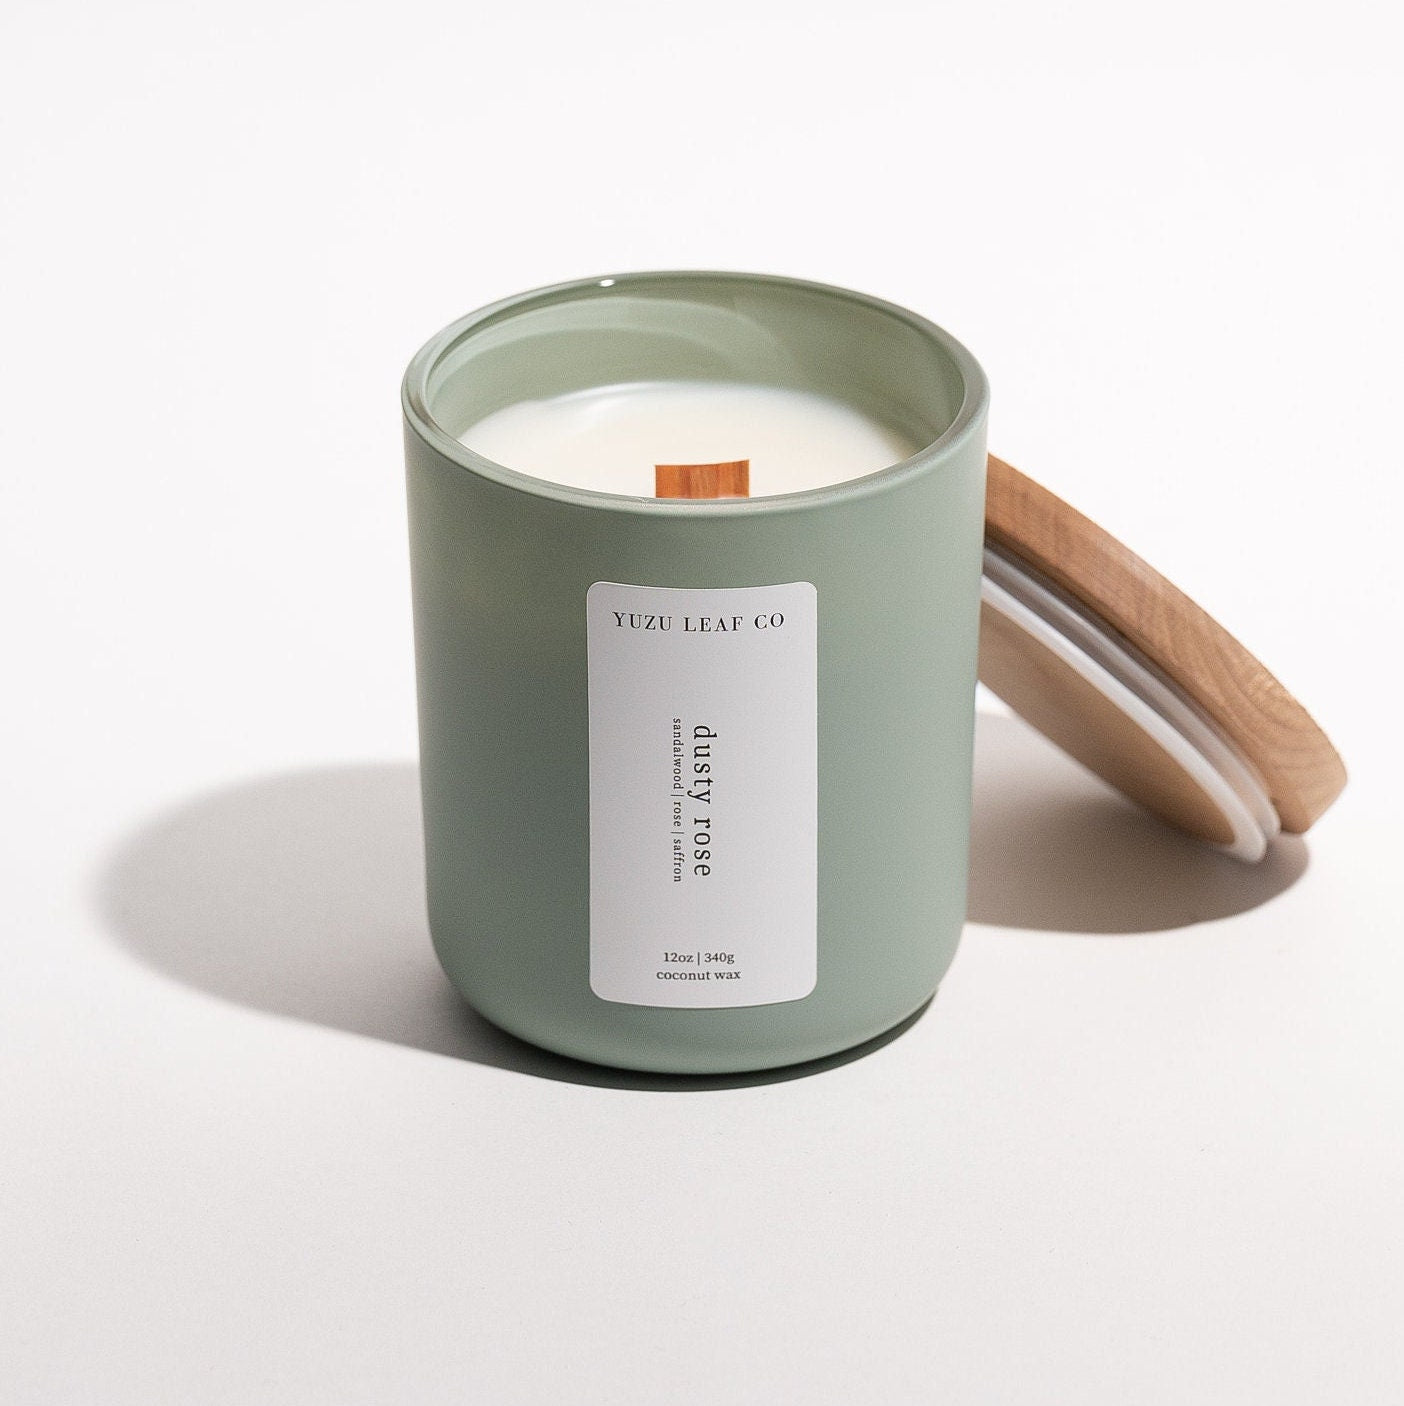 There is a large, cylindrical glass jar candle with a matte finish. The wooden lid is leaning against the glass jar, displaying the wooden wick in the middle. The vertical label says "dusty rose" with notes of sandalwood, rose, and saffron. 